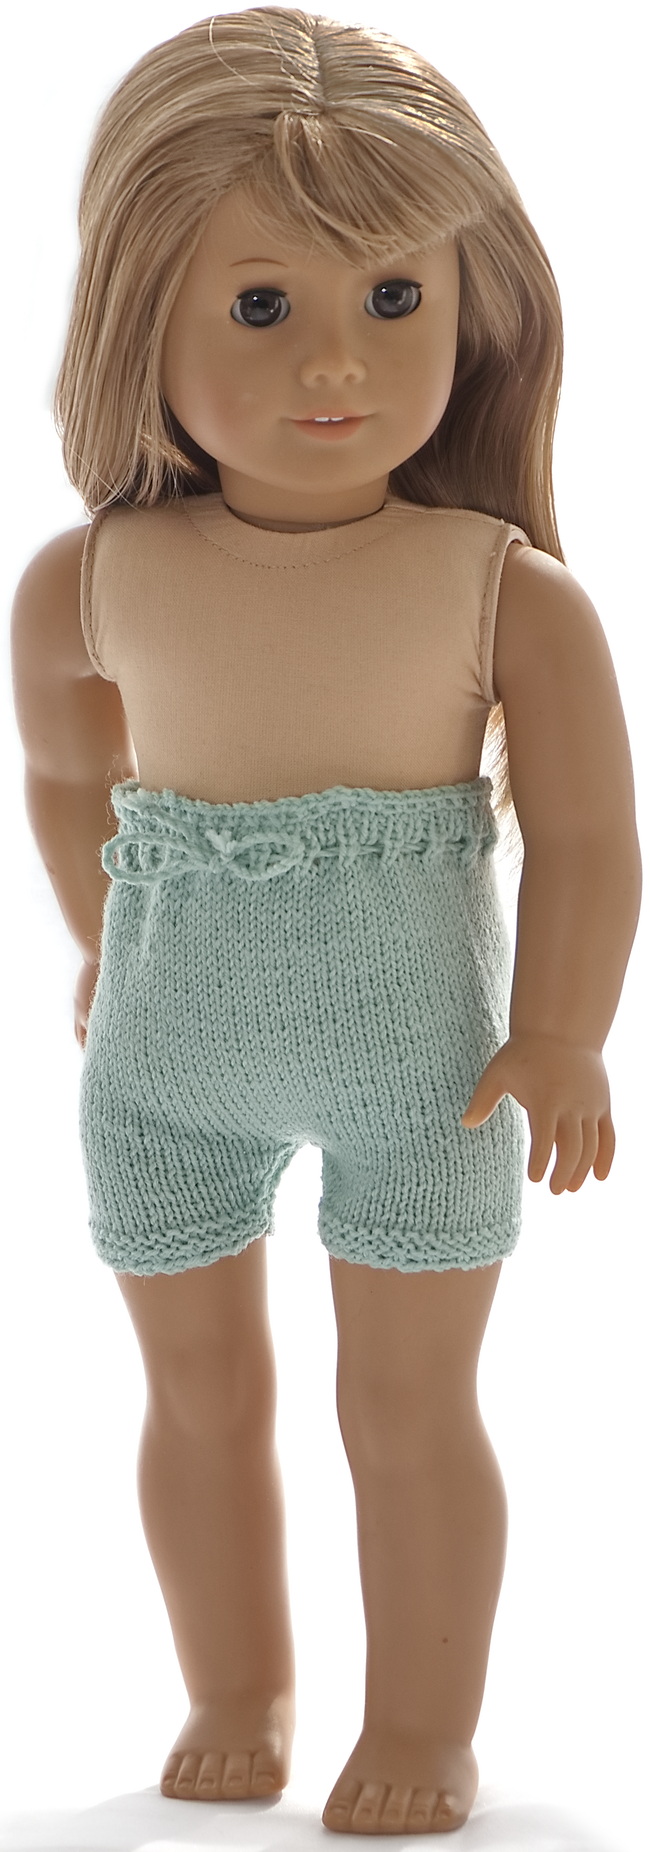 Simple pants knitted in turquoise have crocheted edges and a cord bound around the waist.